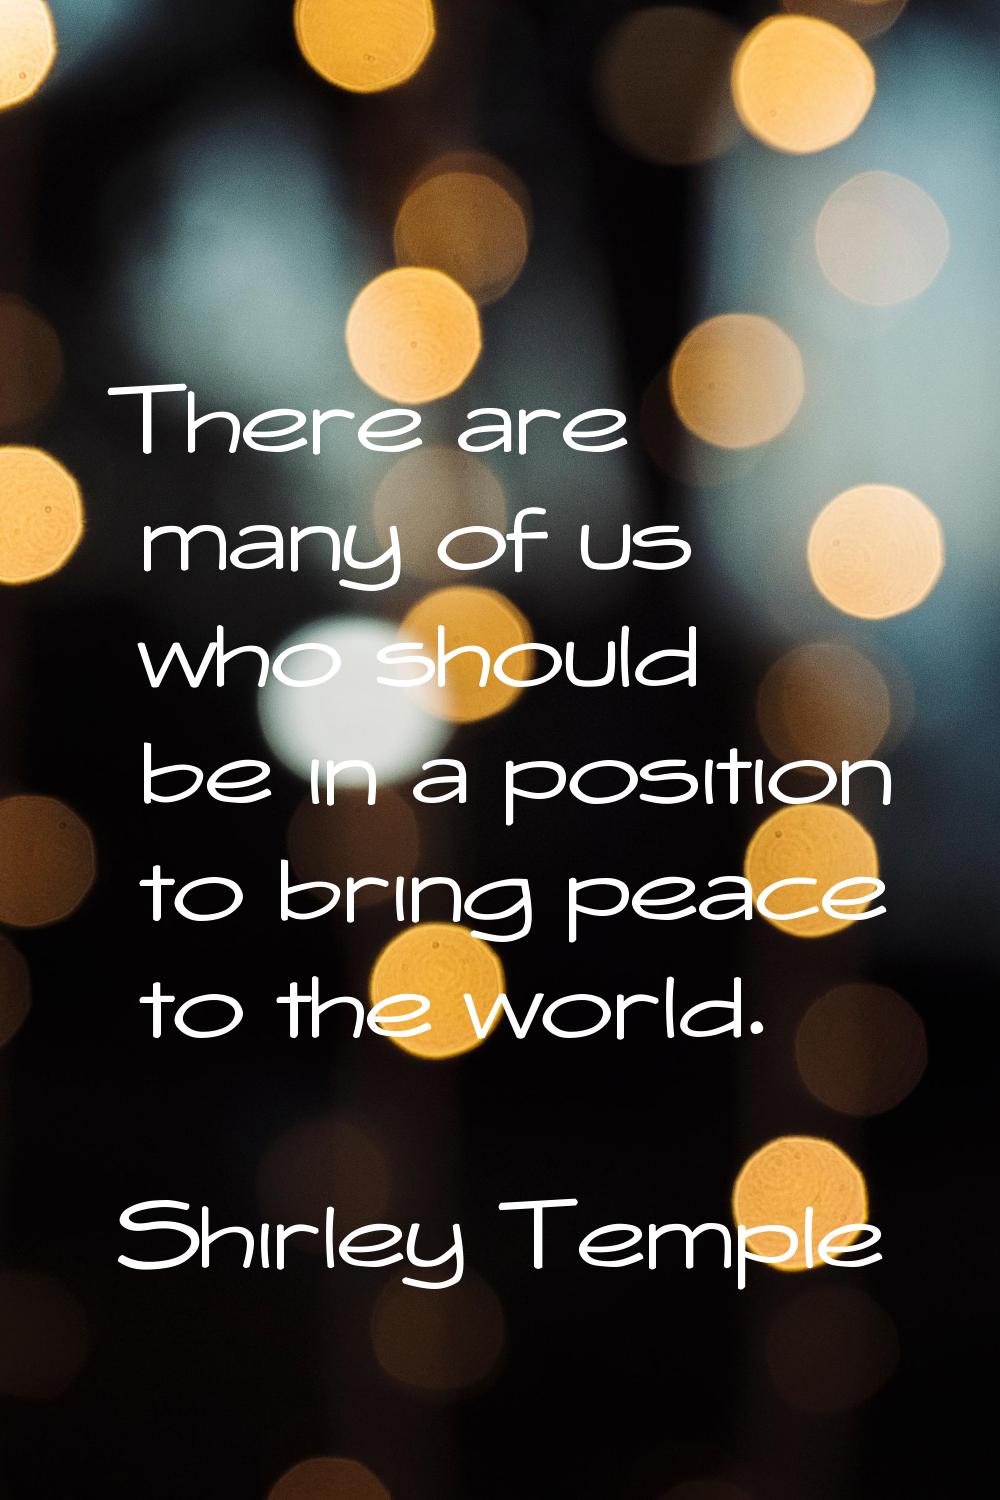 There are many of us who should be in a position to bring peace to the world.